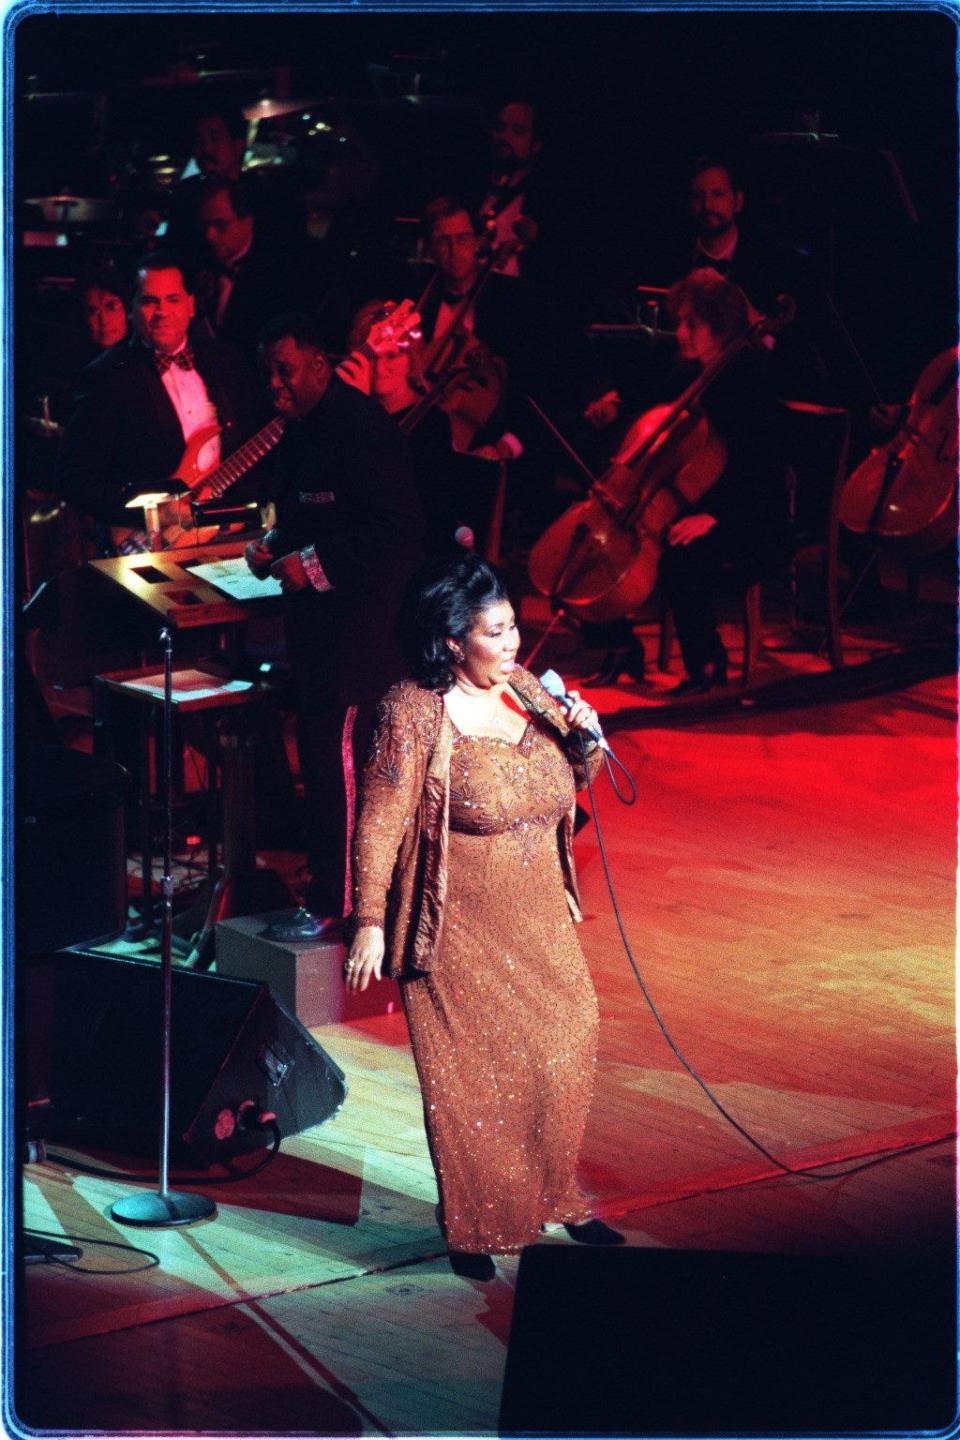 Aretha Franklin sings in concert with the Detroit Symphony Orchestra at Orchestra Hall in Detroit on Nov. 27, 1998.